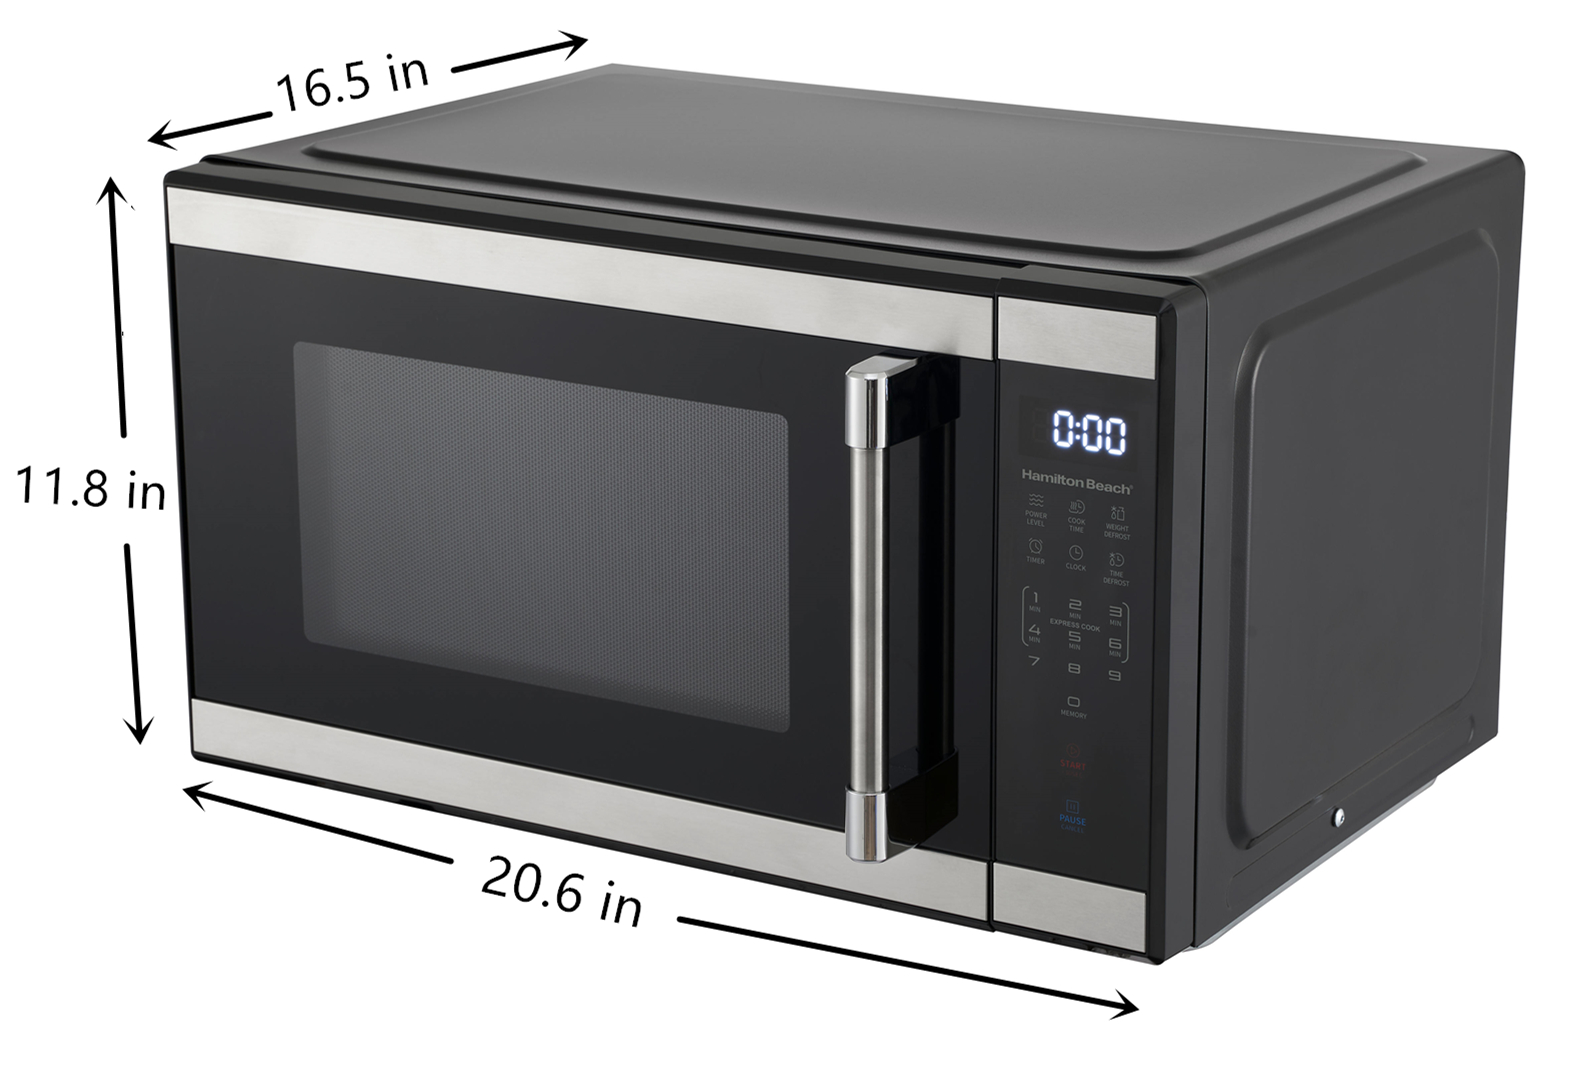 Hamilton Beach 1.1 cu ft Countertop Microwave Oven in Stainless Steel - image 2 of 8